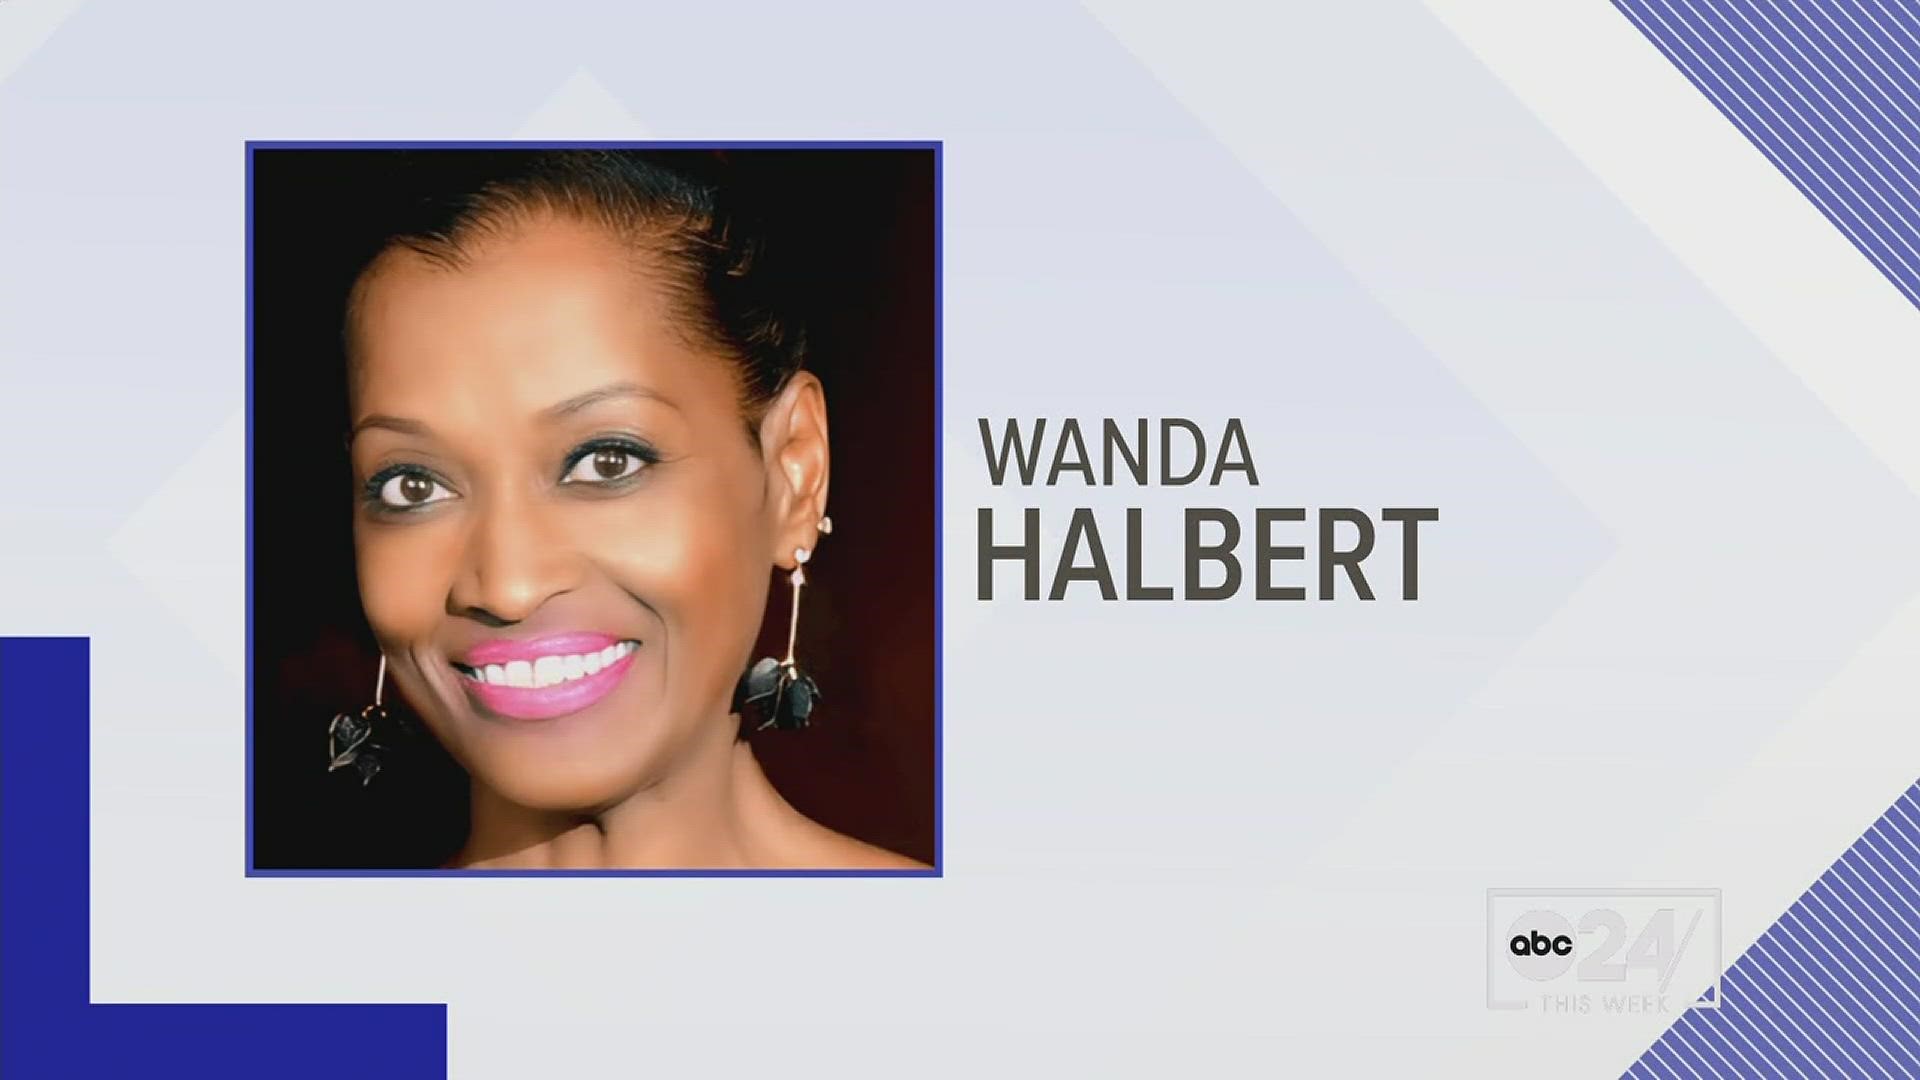 According to the Shelby County Commission, Shelby County Clerk Wanda Halbert will hire a temporary special advisor that will report back to the commission.